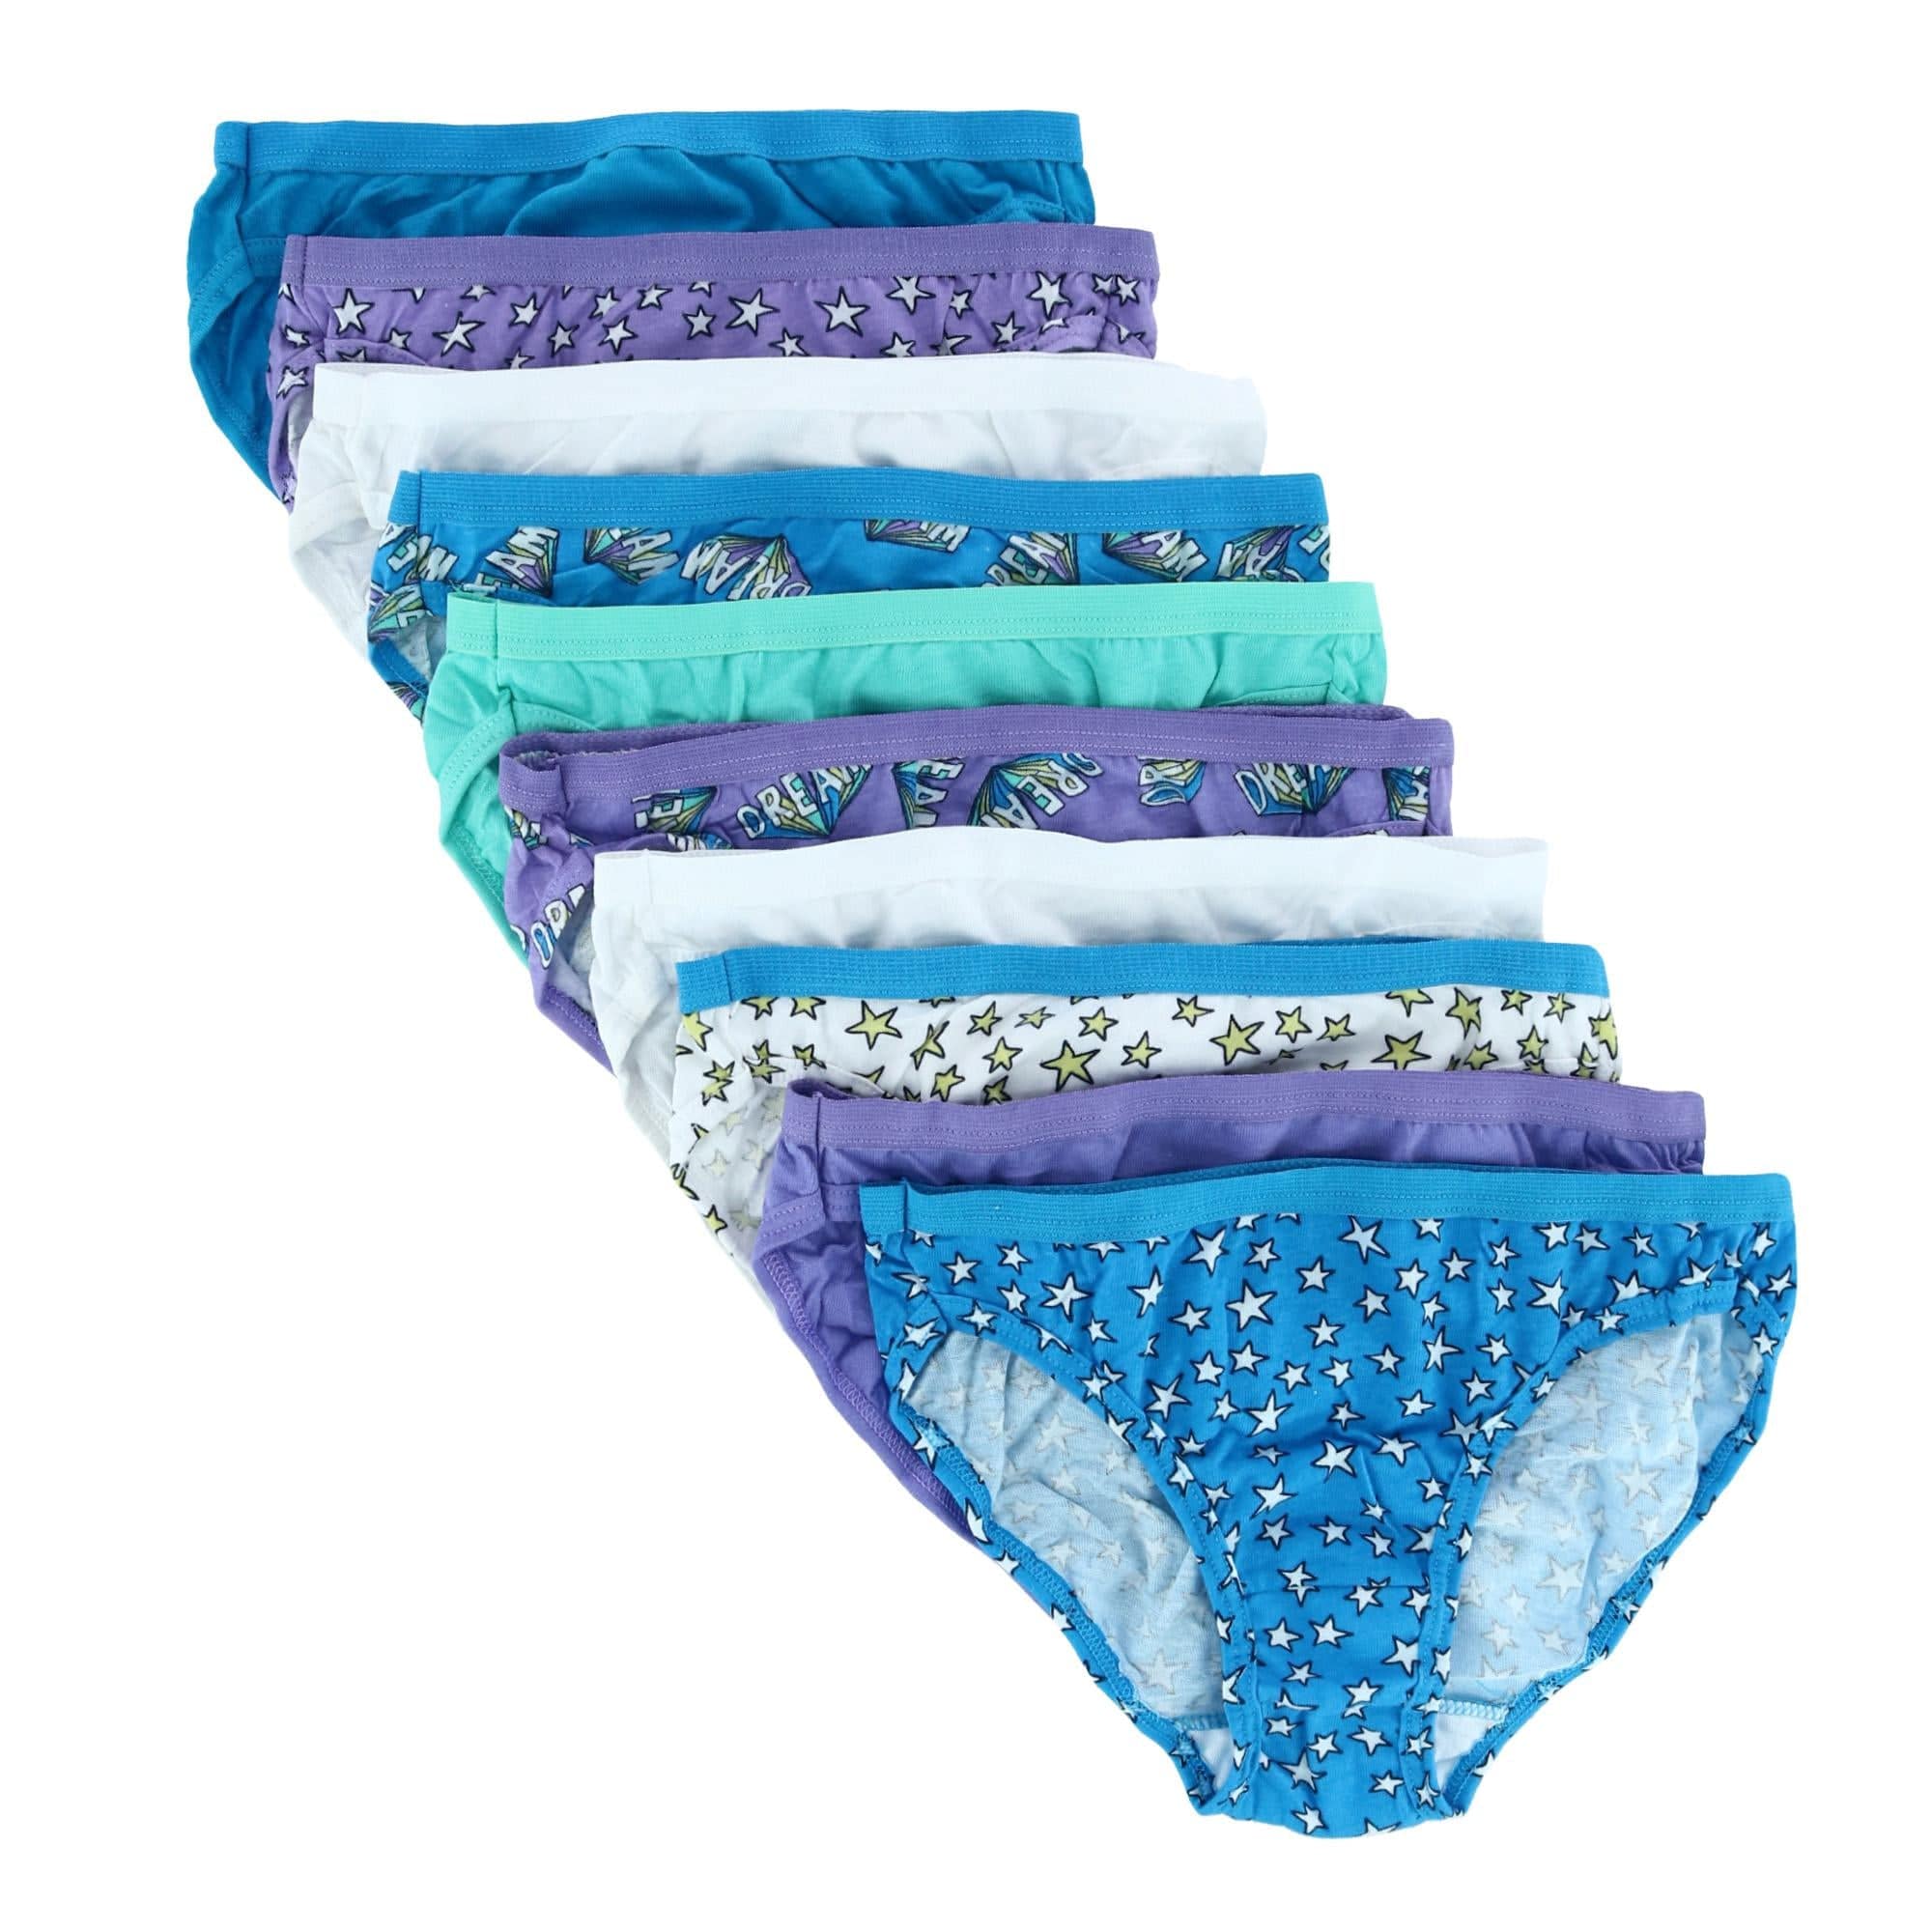 Girl's Assorted Cotton Bikini Underwear (10 Pack) by Fruit of the Loom